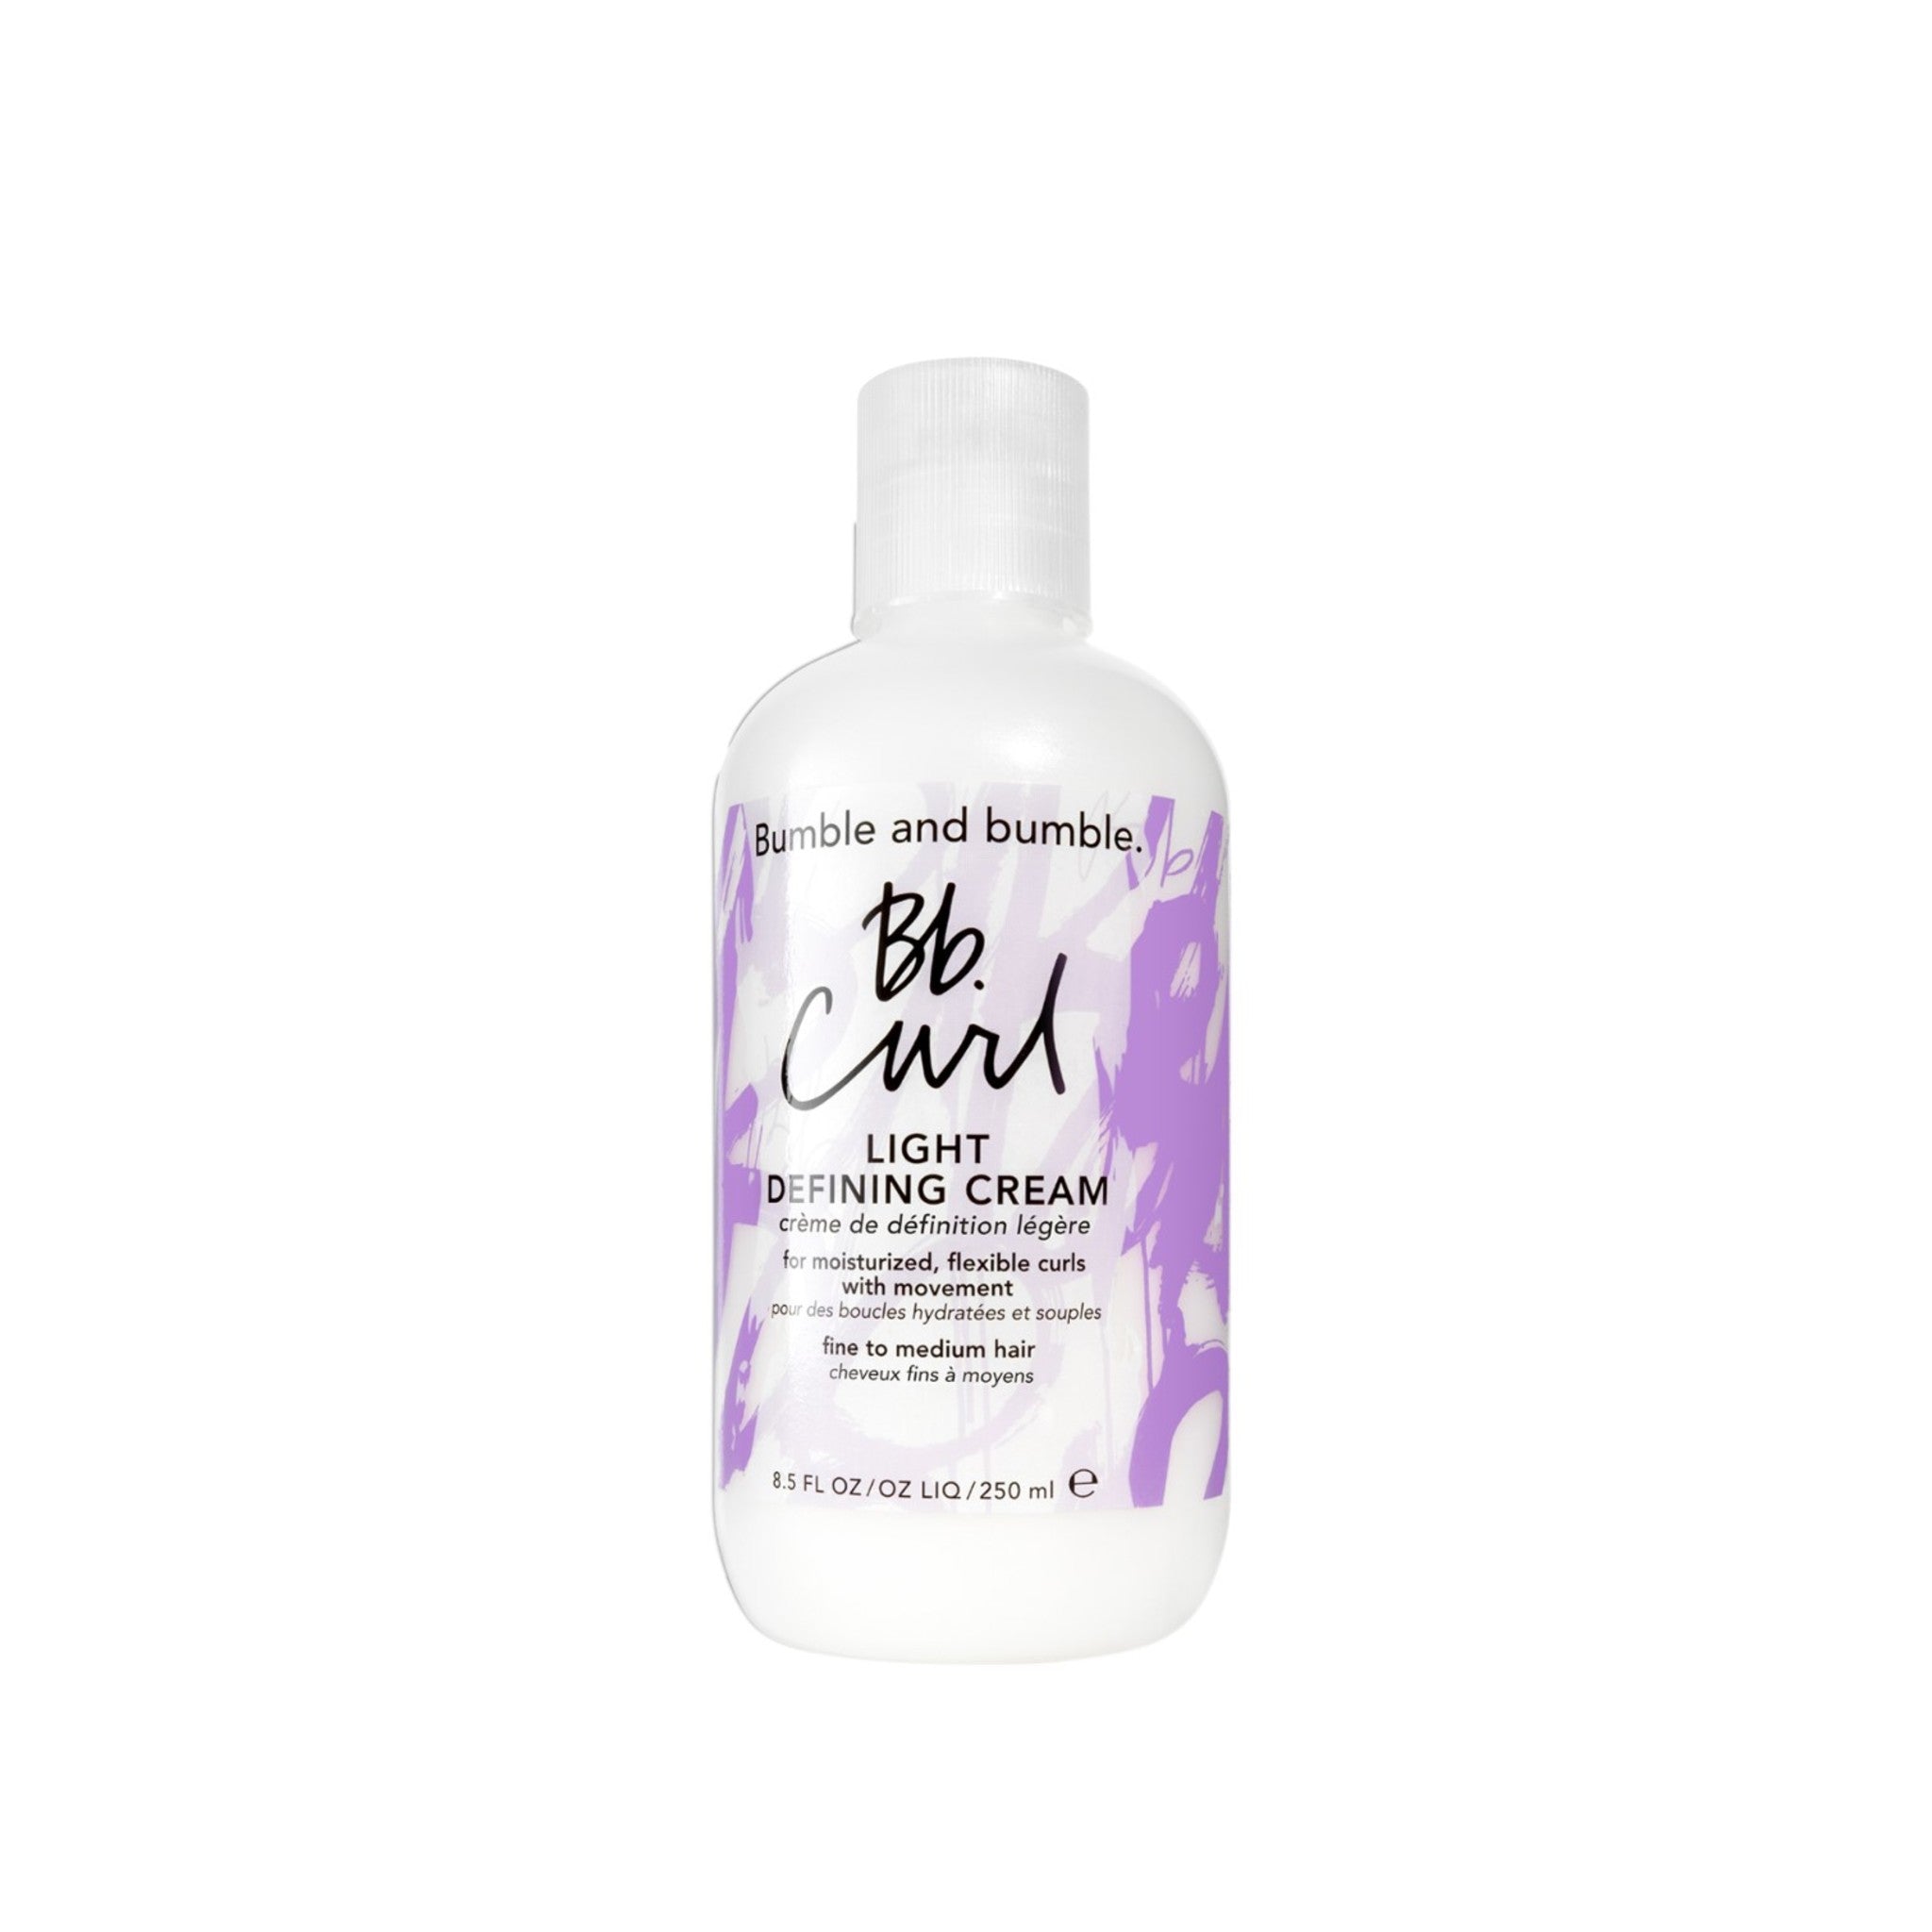 Bumble and Bumble Curl Light Defining Cream Size variant: 8.5 oz main image.